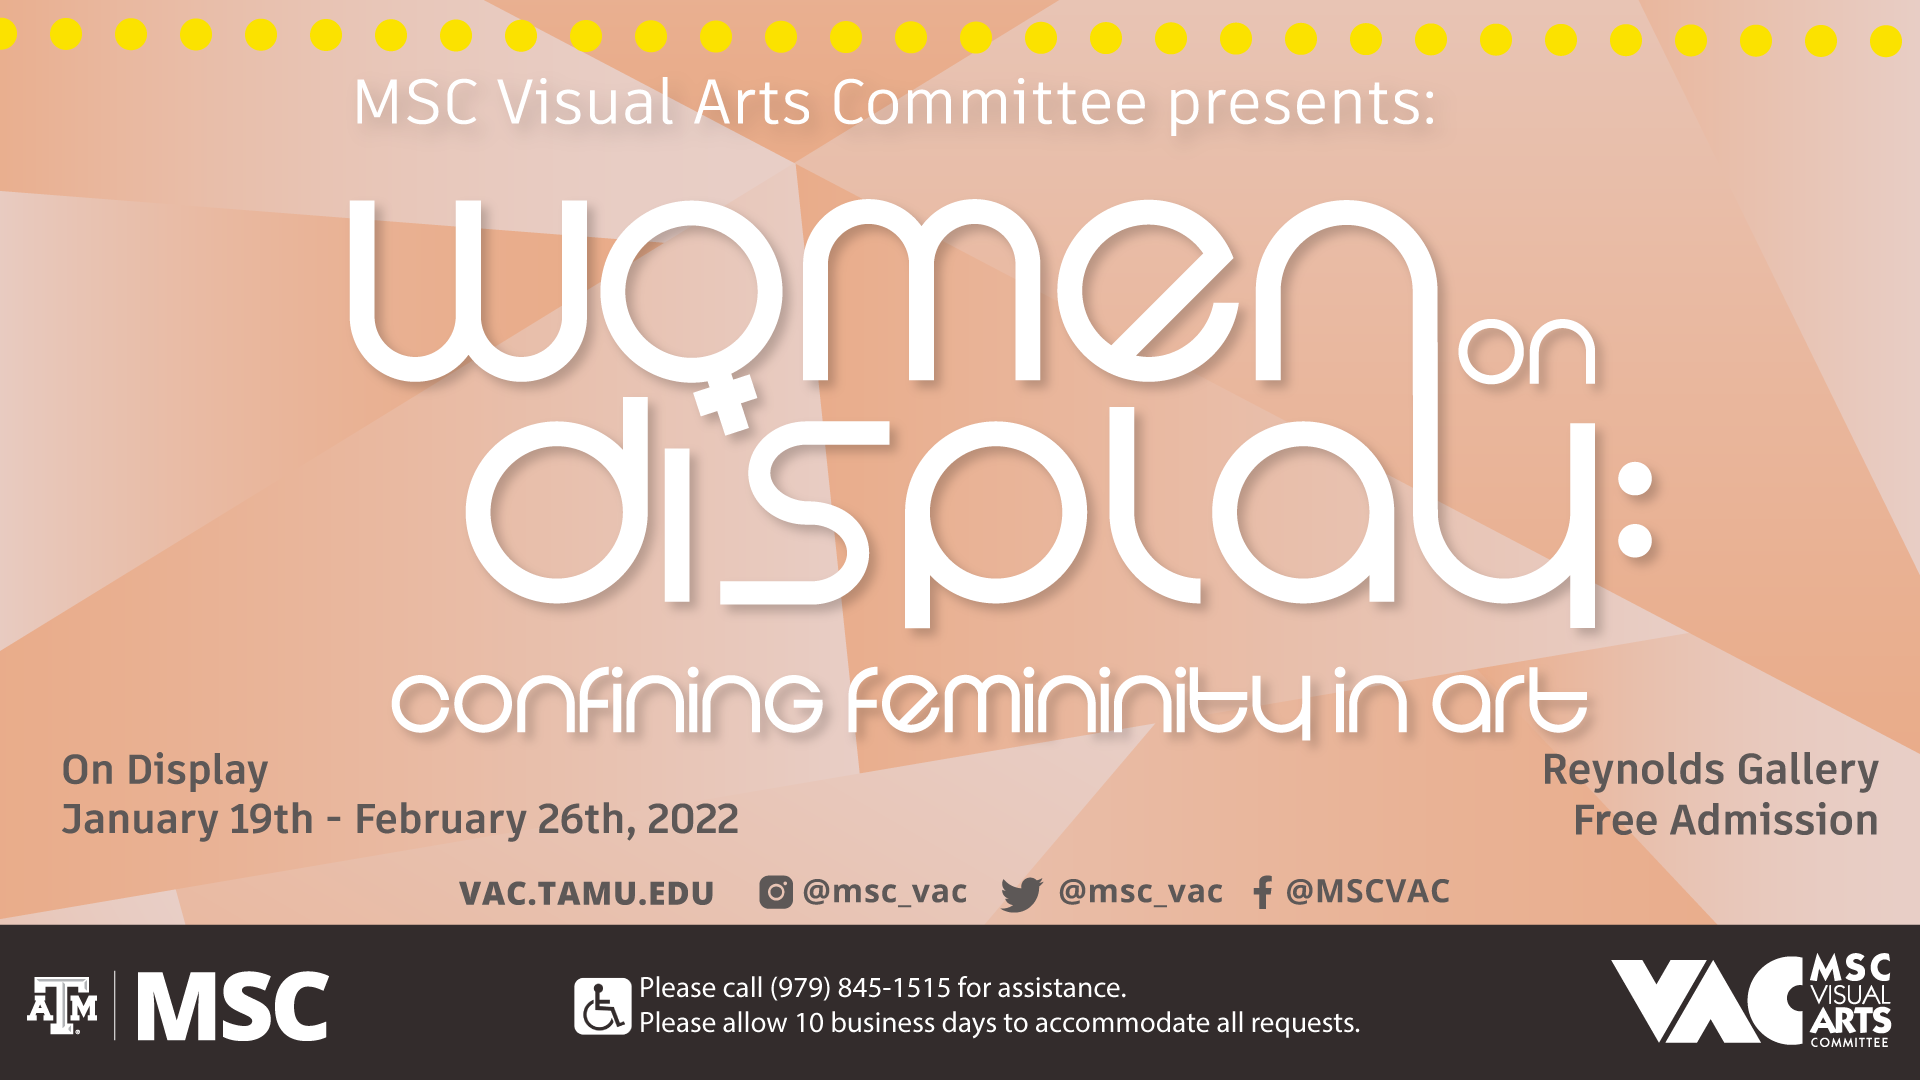 MSC Visual Arts Committee Presents: Women on Display: Confining Femininity in Art. On Display: January 19th to February 26, 2022. At Reynolds Gallery. Free Admission. Website: vac.tamu.edu. Instagram: @msc_vac. Twitter: @msc_vac. Facebook: @MSCVAC Please call (979) 845-1515 for assistance. Please allow 10 business days to accommodate all requests.